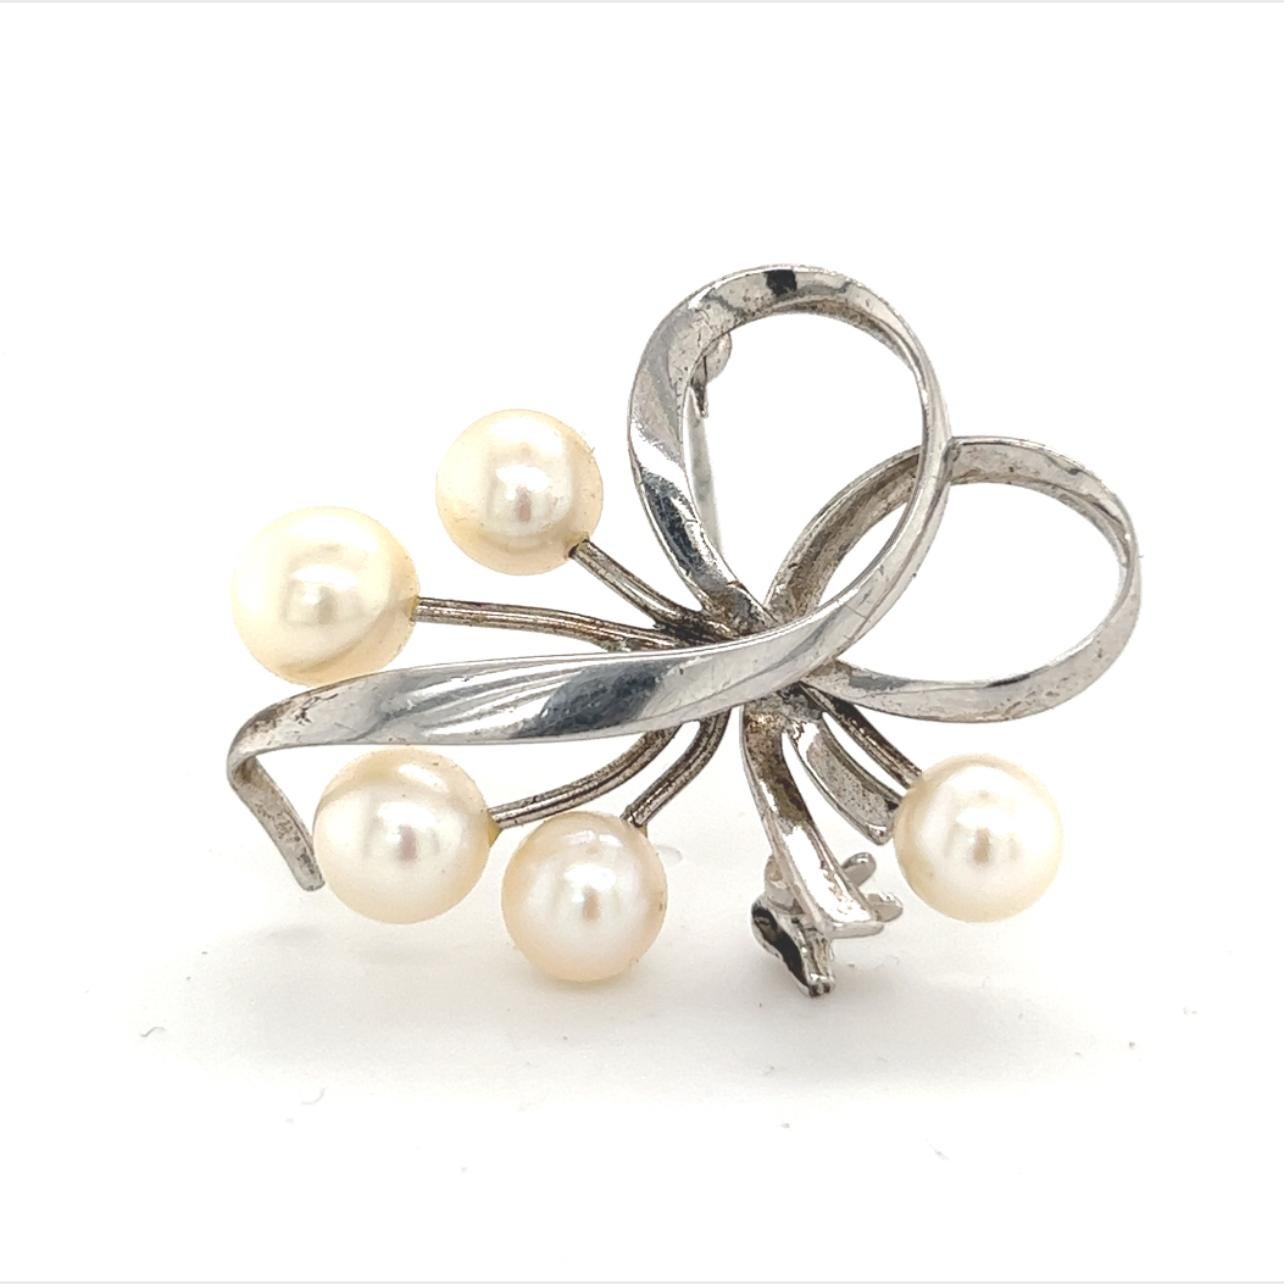 Mikimoto Estate Akoya Pearl Brooch 6.75 mm Sterling Silver M237

This elegant Authentic Mikimoto Estate sterling silver brooch has 5 Saltwater Akoya Cultured Pearls and has a weight of 4.80 Grams.

TRUSTED SELLER SINCE 2002

PLEASE SEE OUR HUNDREDS